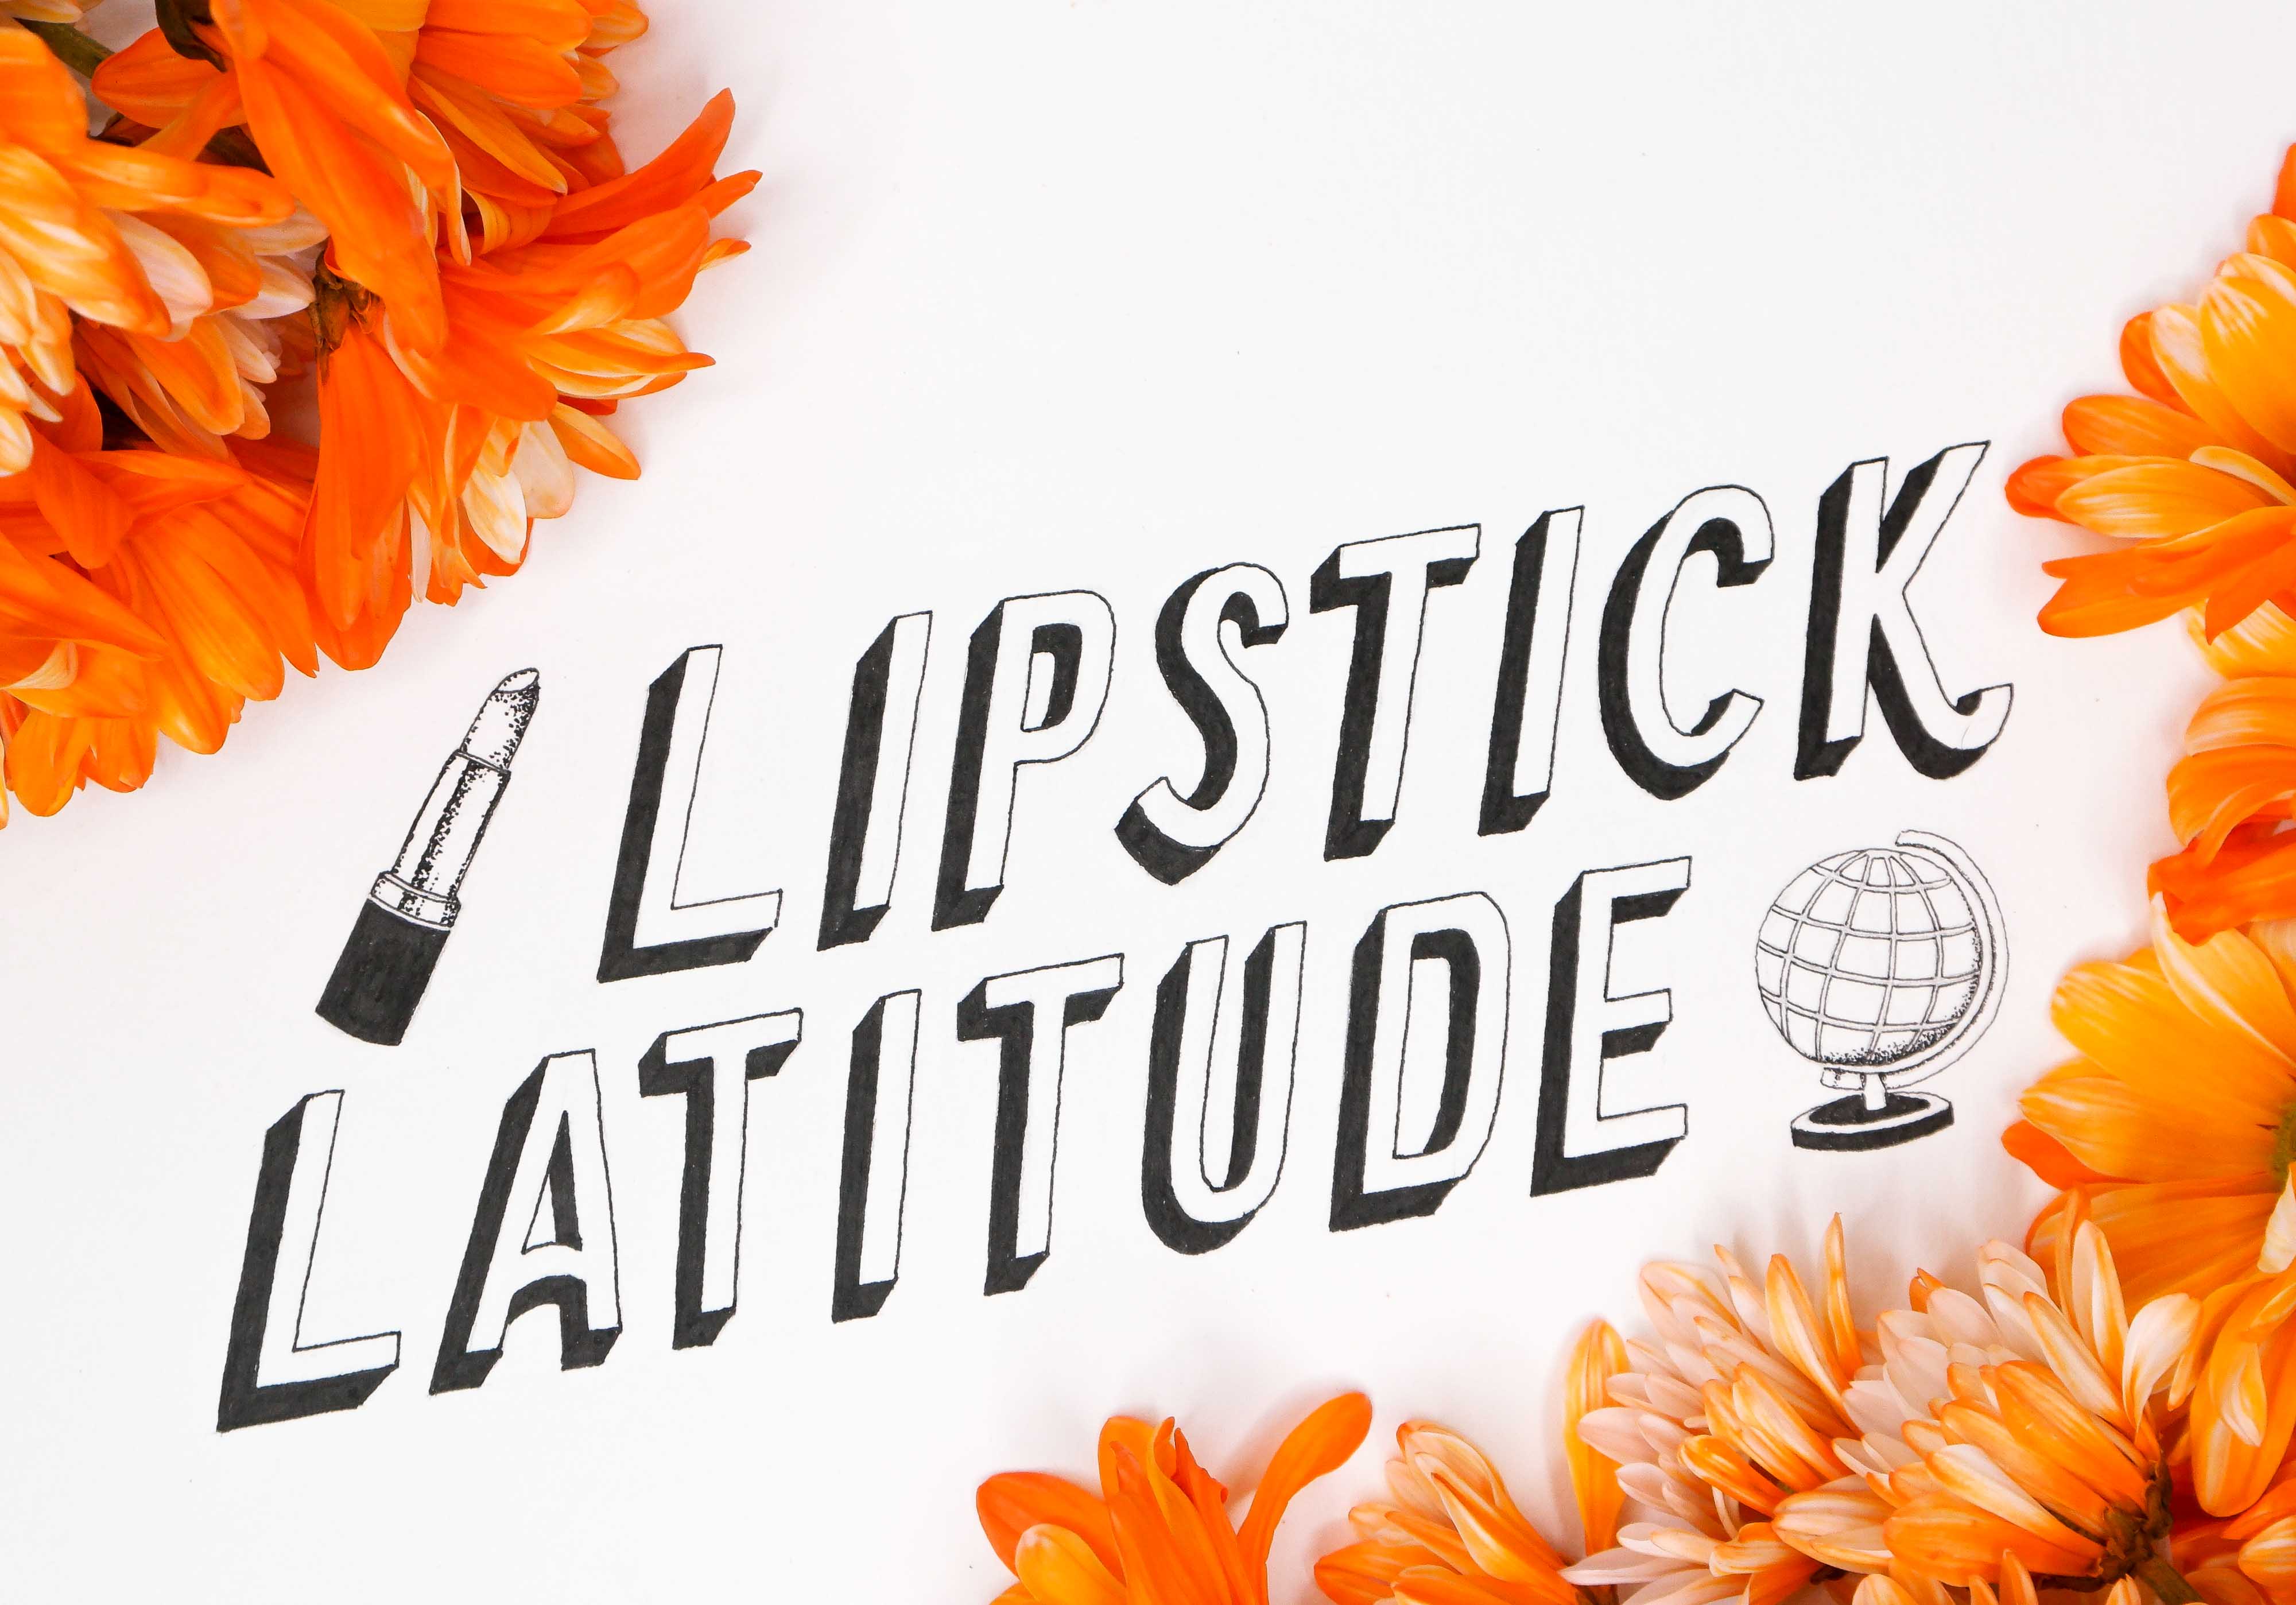 What happened to A Different Face? Announcing Lipstick Latitude